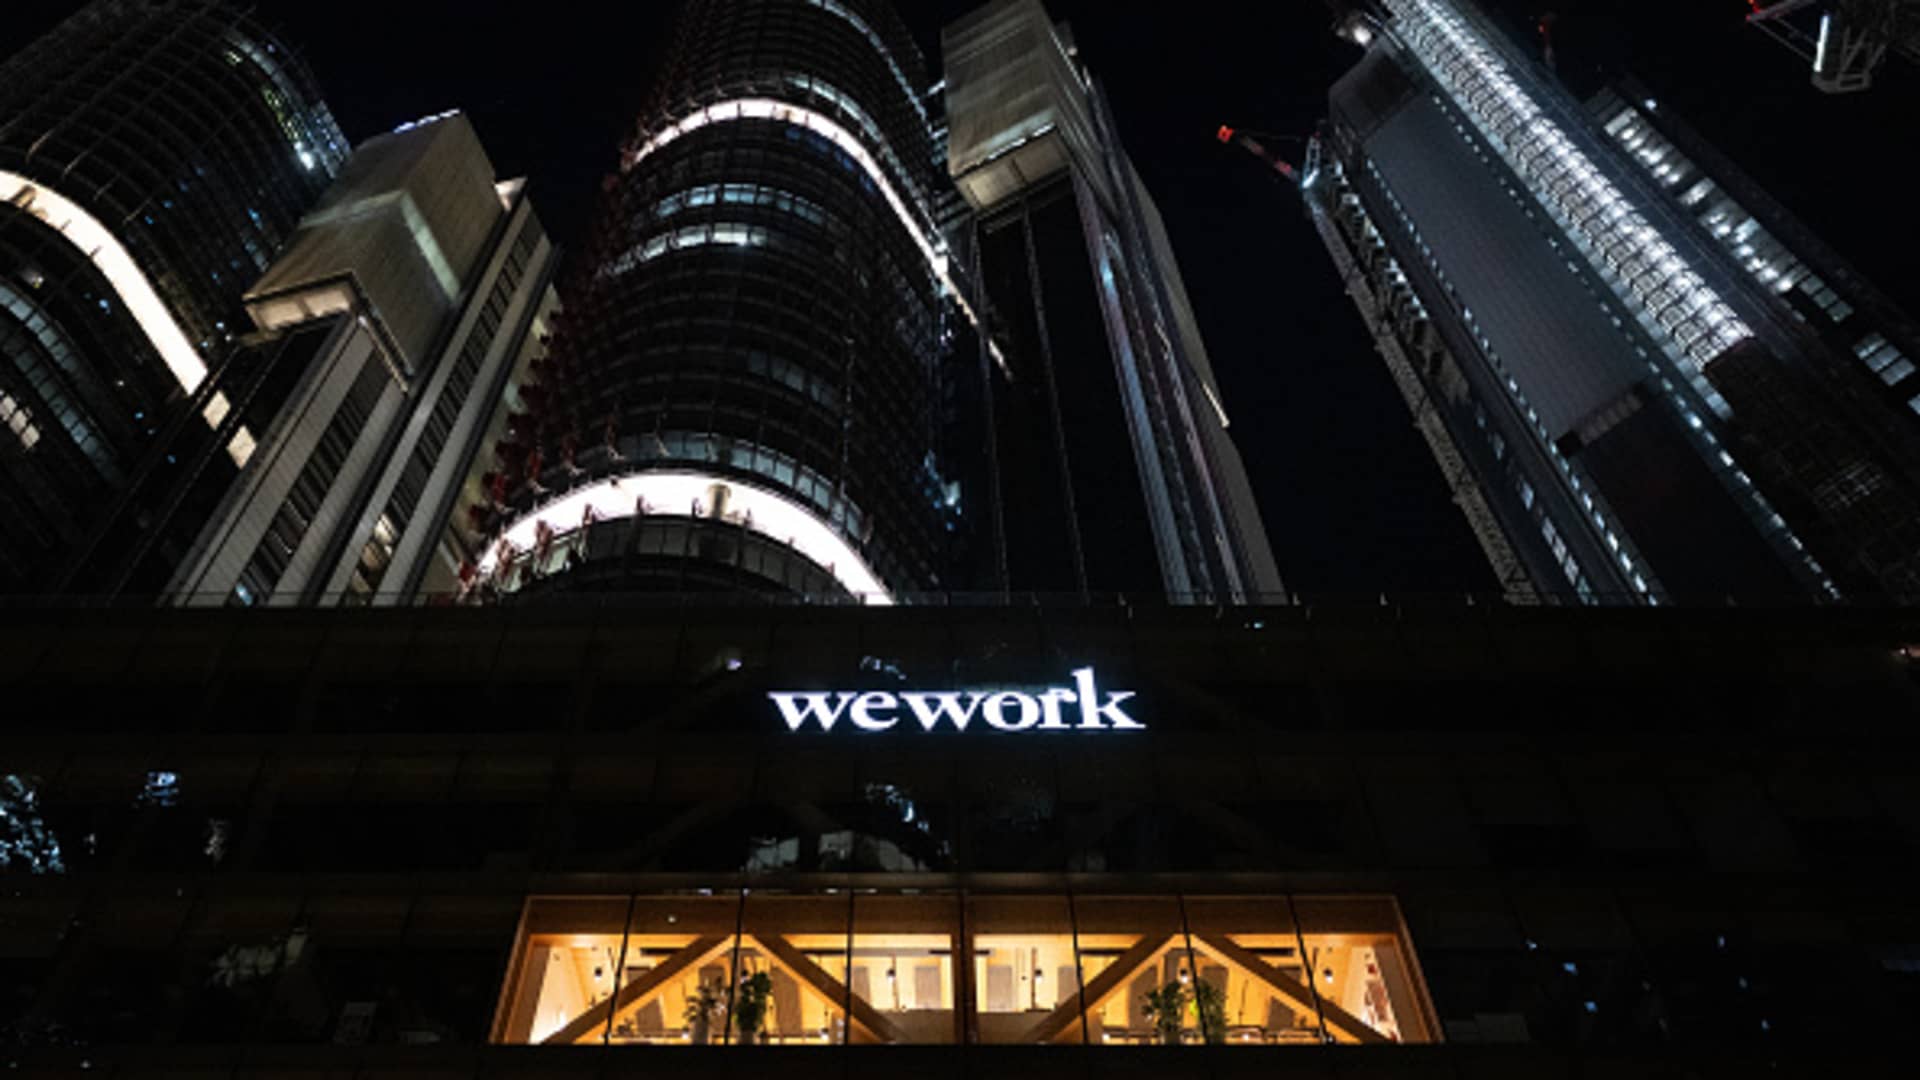 From $40 billion to ‘going concern’ — WeWork warns of possible bankruptcy